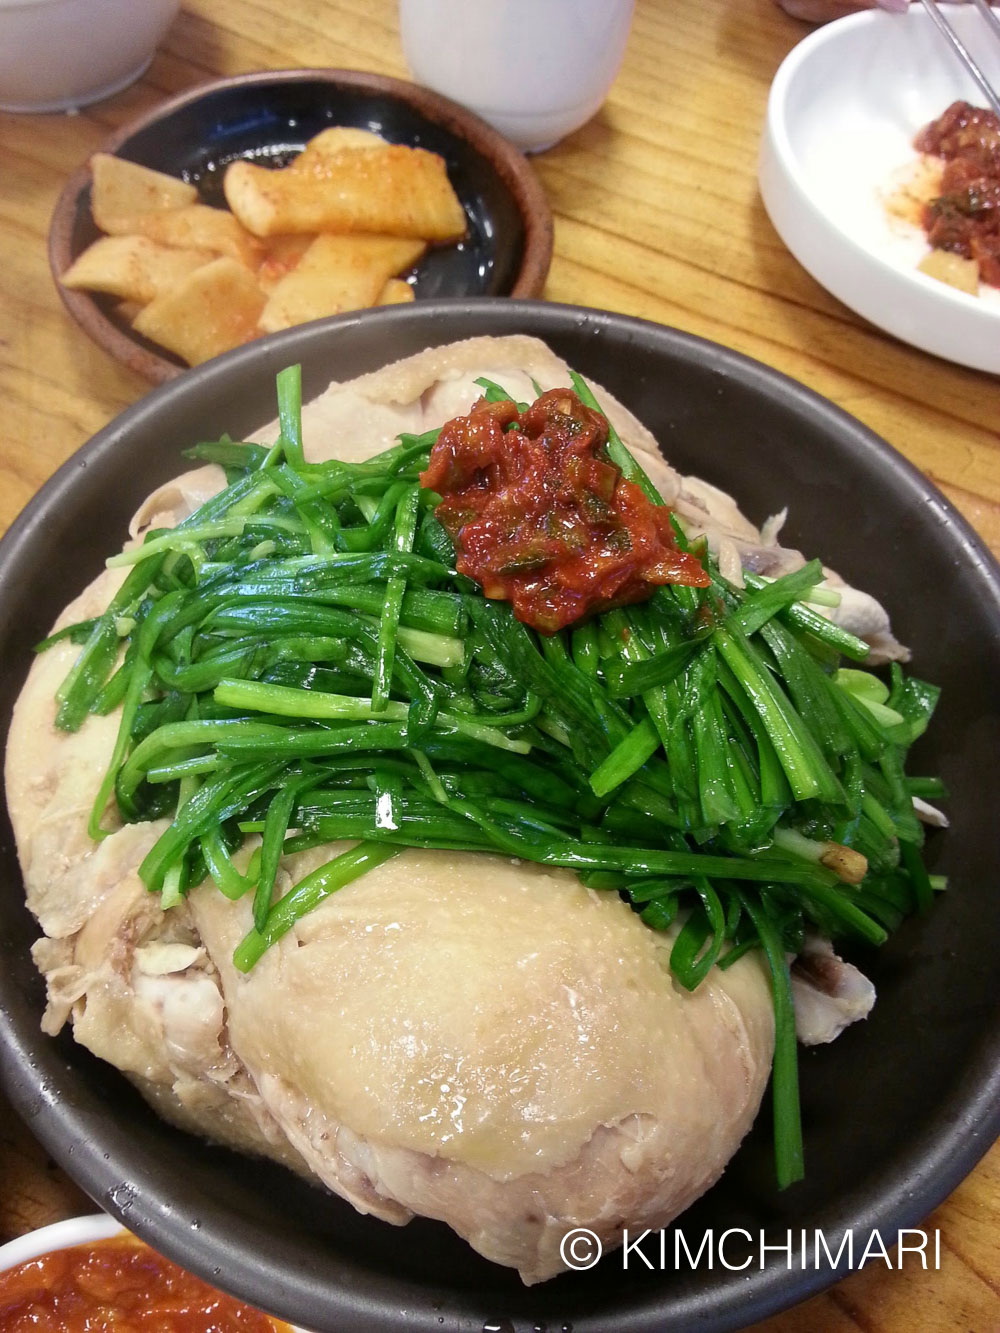 jjimdak served with chives and sauce at Jinnampo restaurant in Seoul